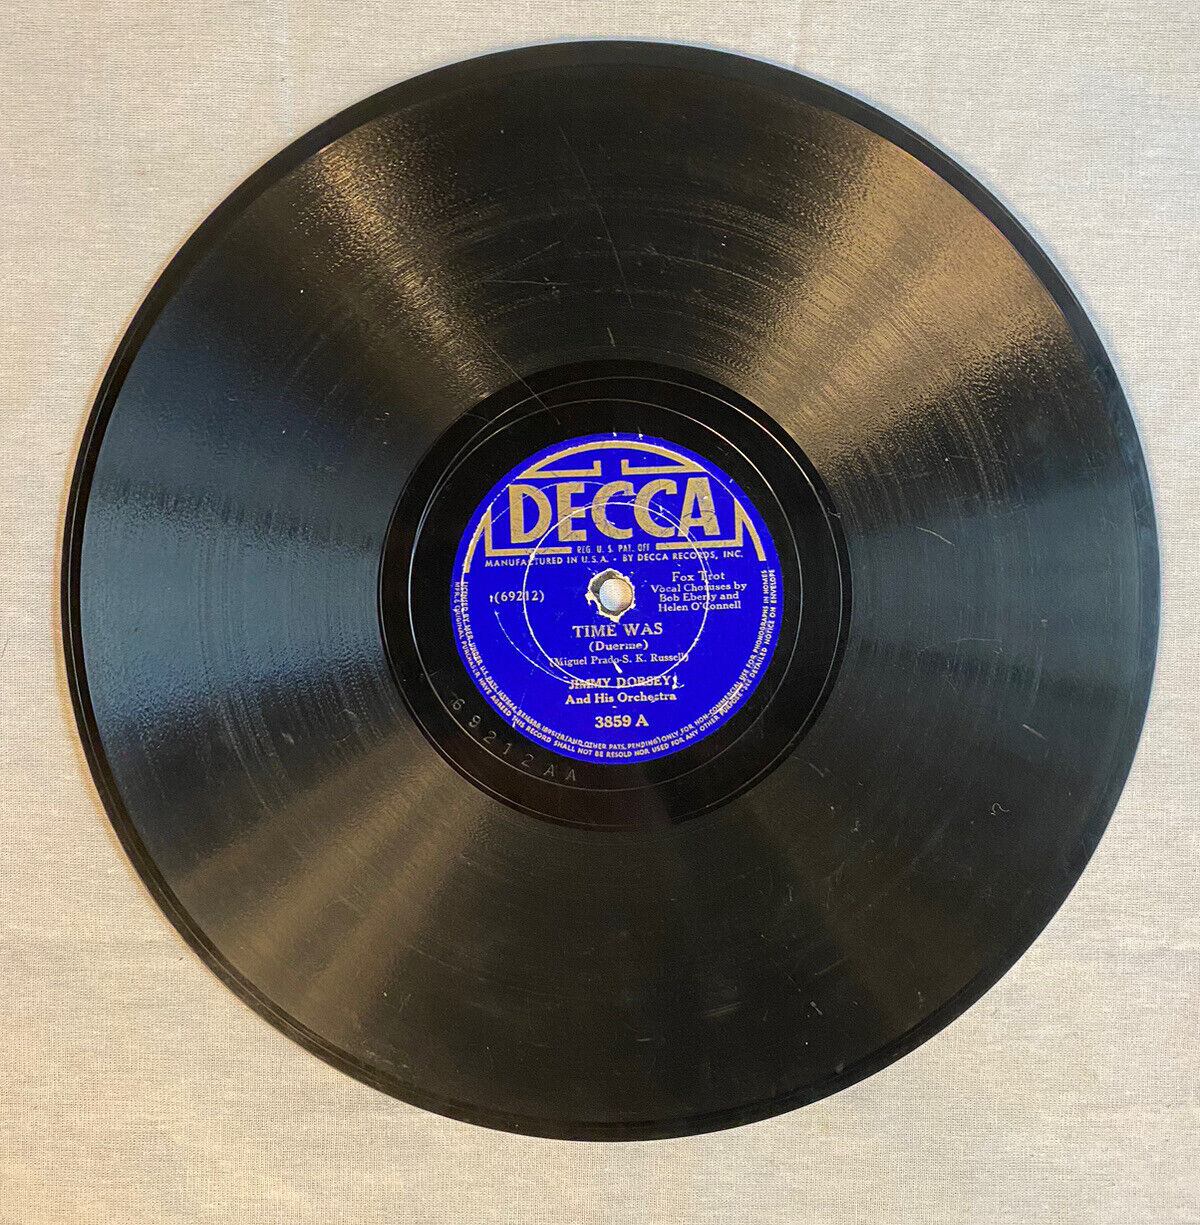 Jimmy Dorsey • Isle Of Pines/Time Was • 10” 78 RPM Decca Vintage Jazz Record